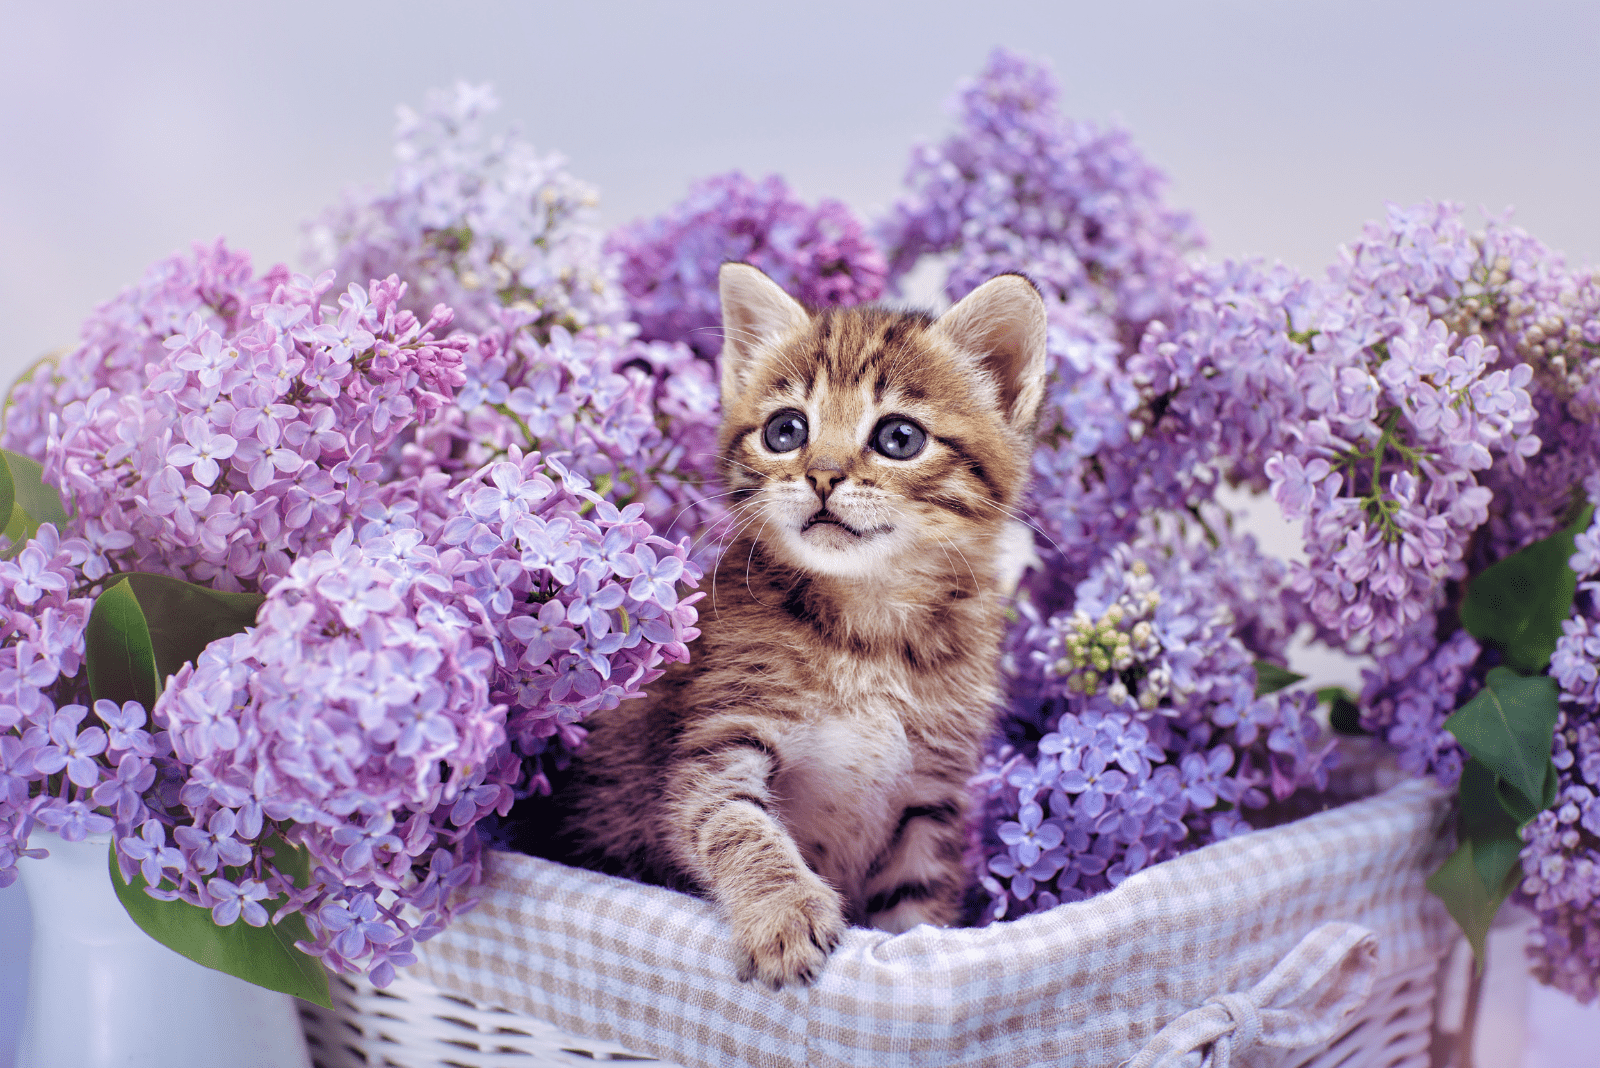 kitten in a basket with lilacs